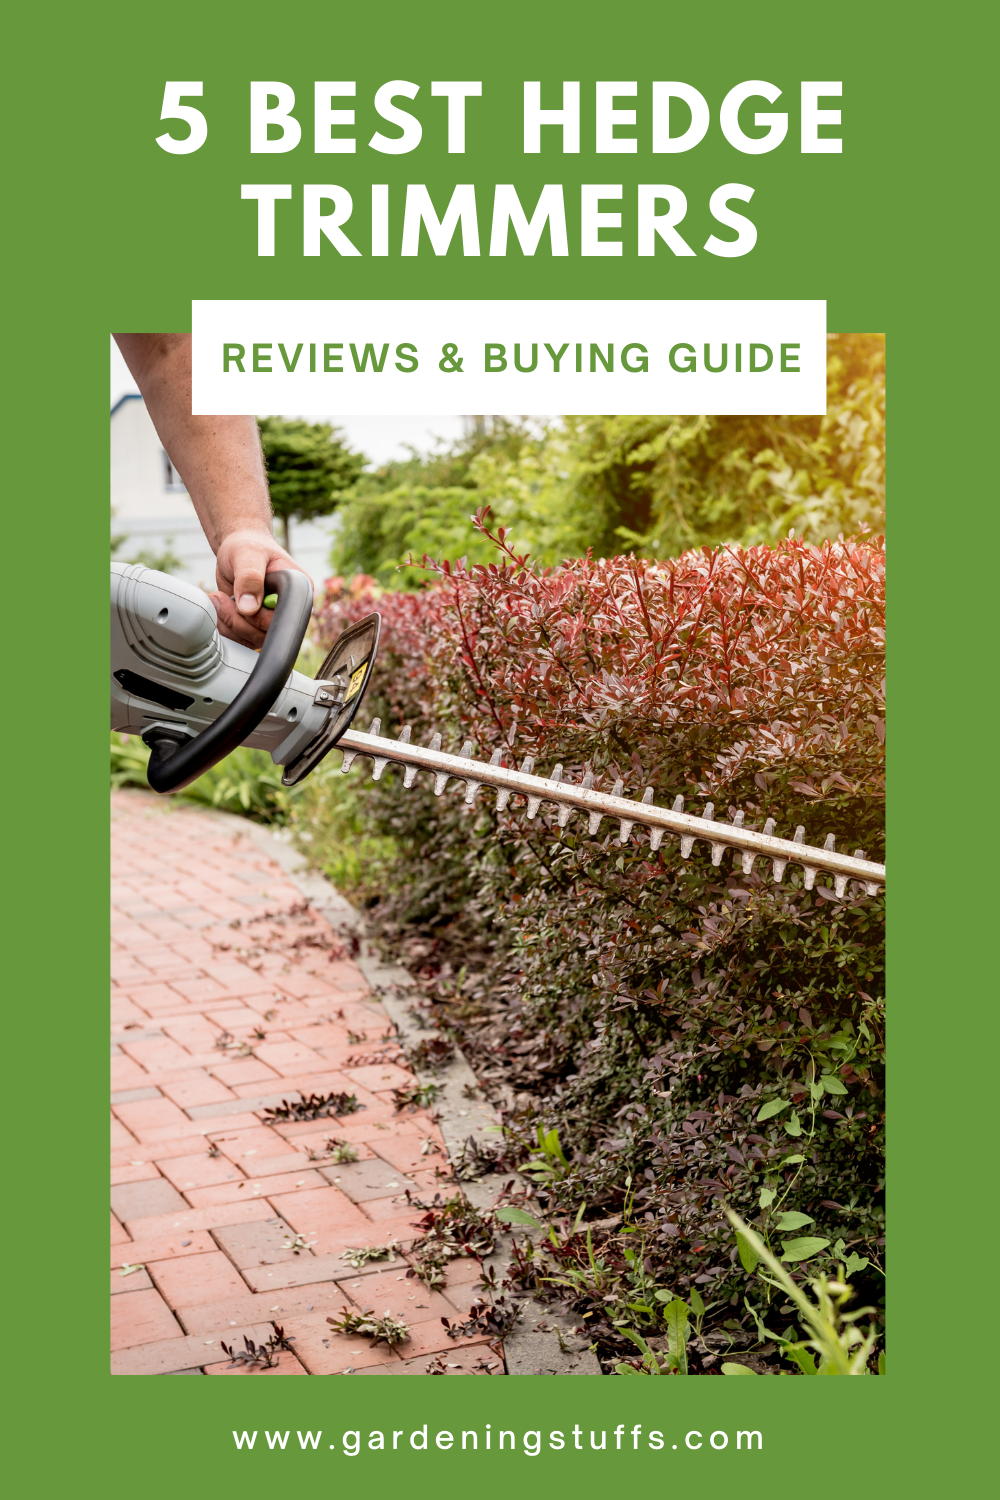 Hedge trimmers make gardening really convenient but, with the wide variety of hedge trimmers available, choosing the right one can be difficult. Read on and discover the best hedge trimmers, along with some tips on what to consider before buying.